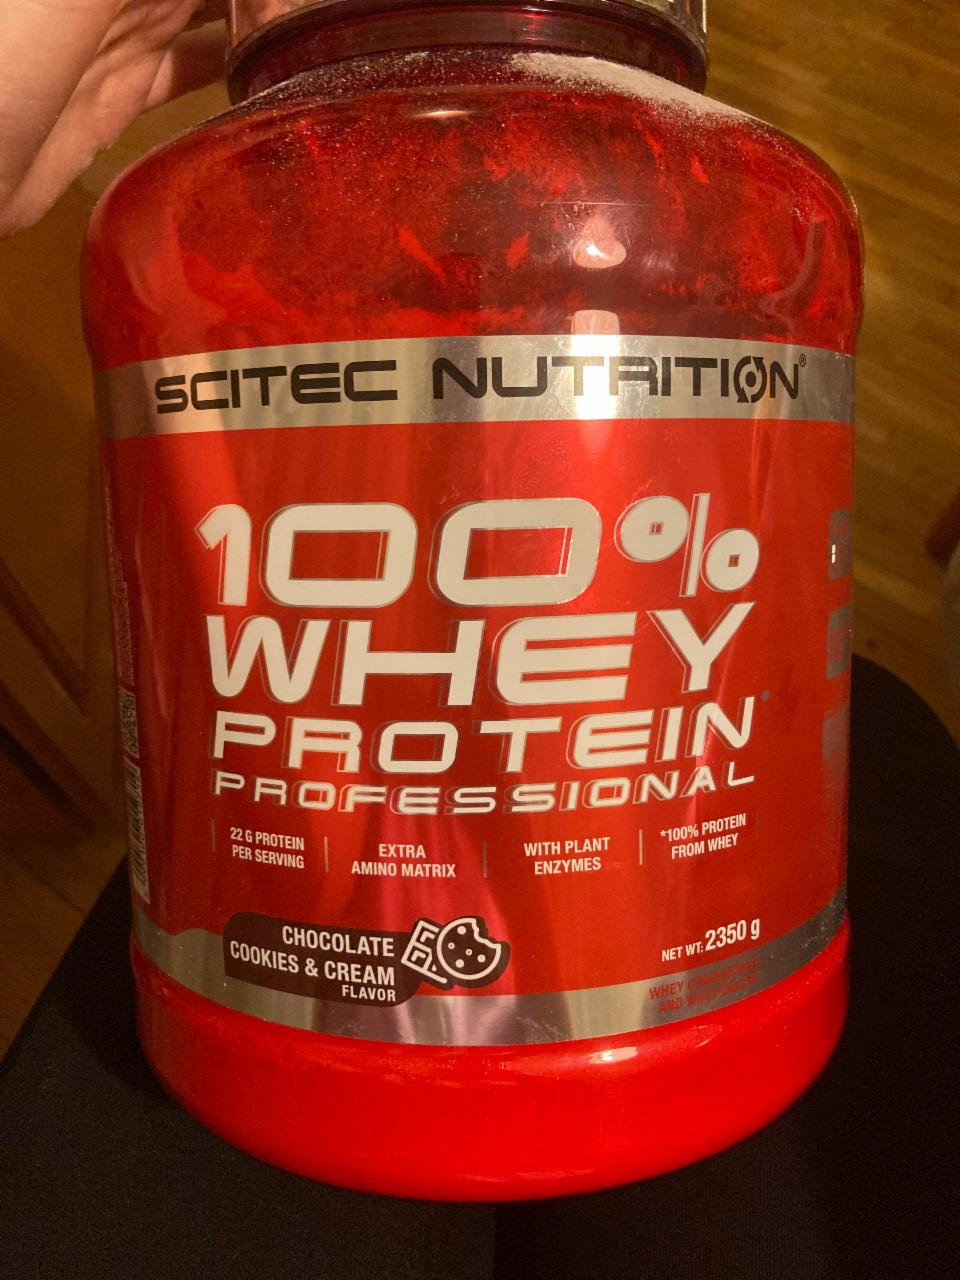 Fotografie - 100% Whey Protein proffesional Chocolate Cookies & Cream